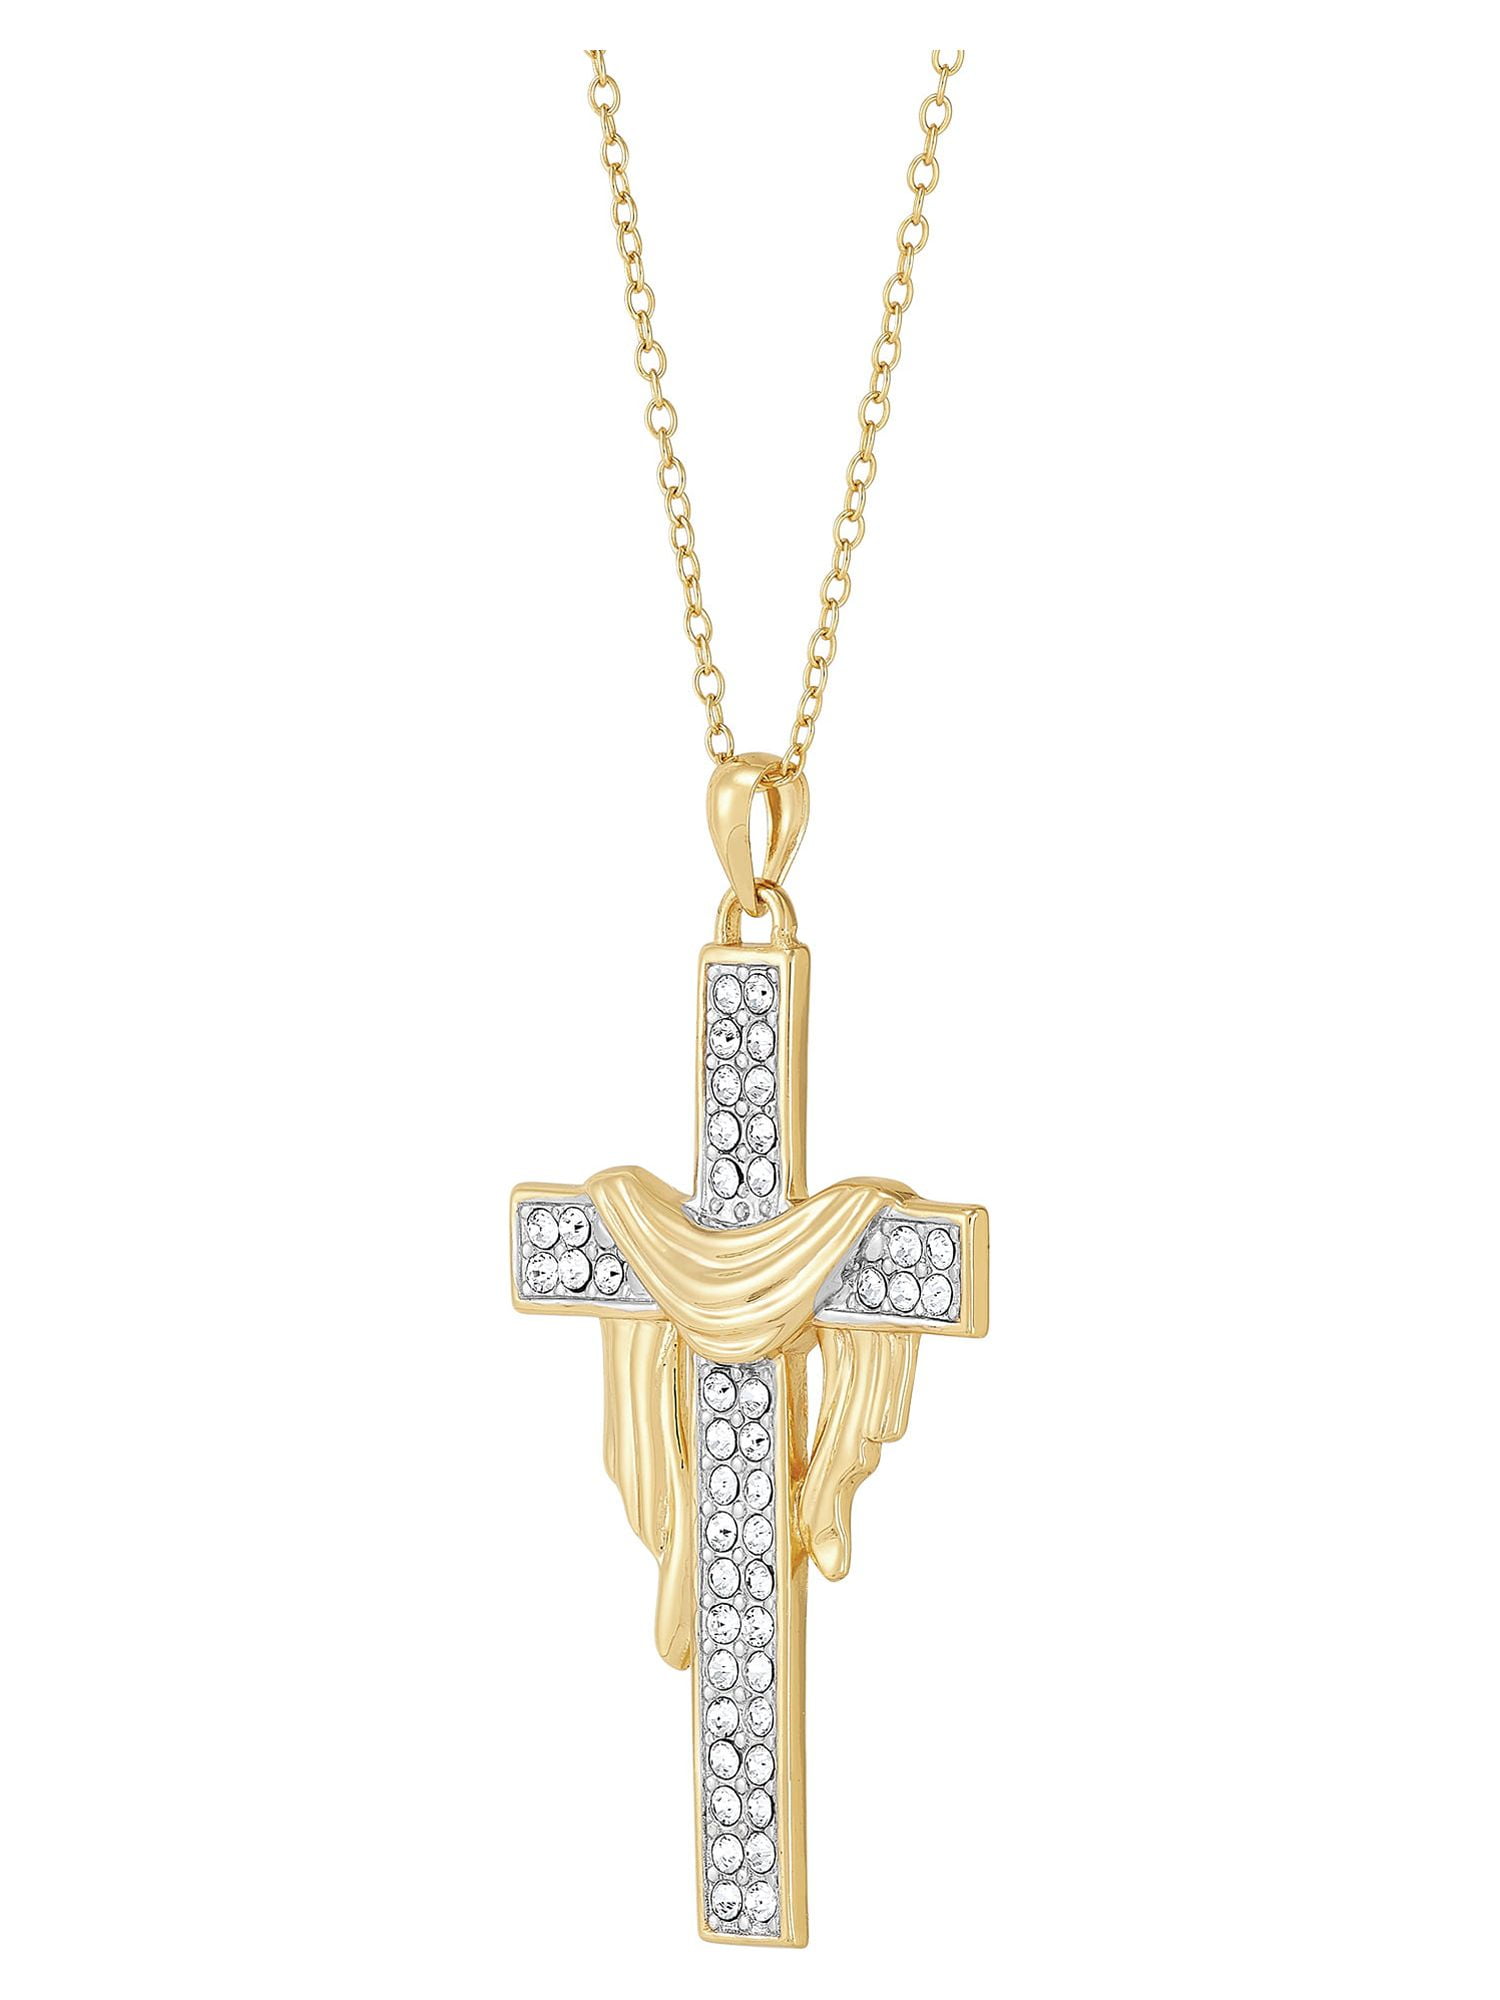 Buy Charme Women's Gold tone plated cross pendant with chain  (Multicolour-5, 3.6cmX2.5cm) at Amazon.in